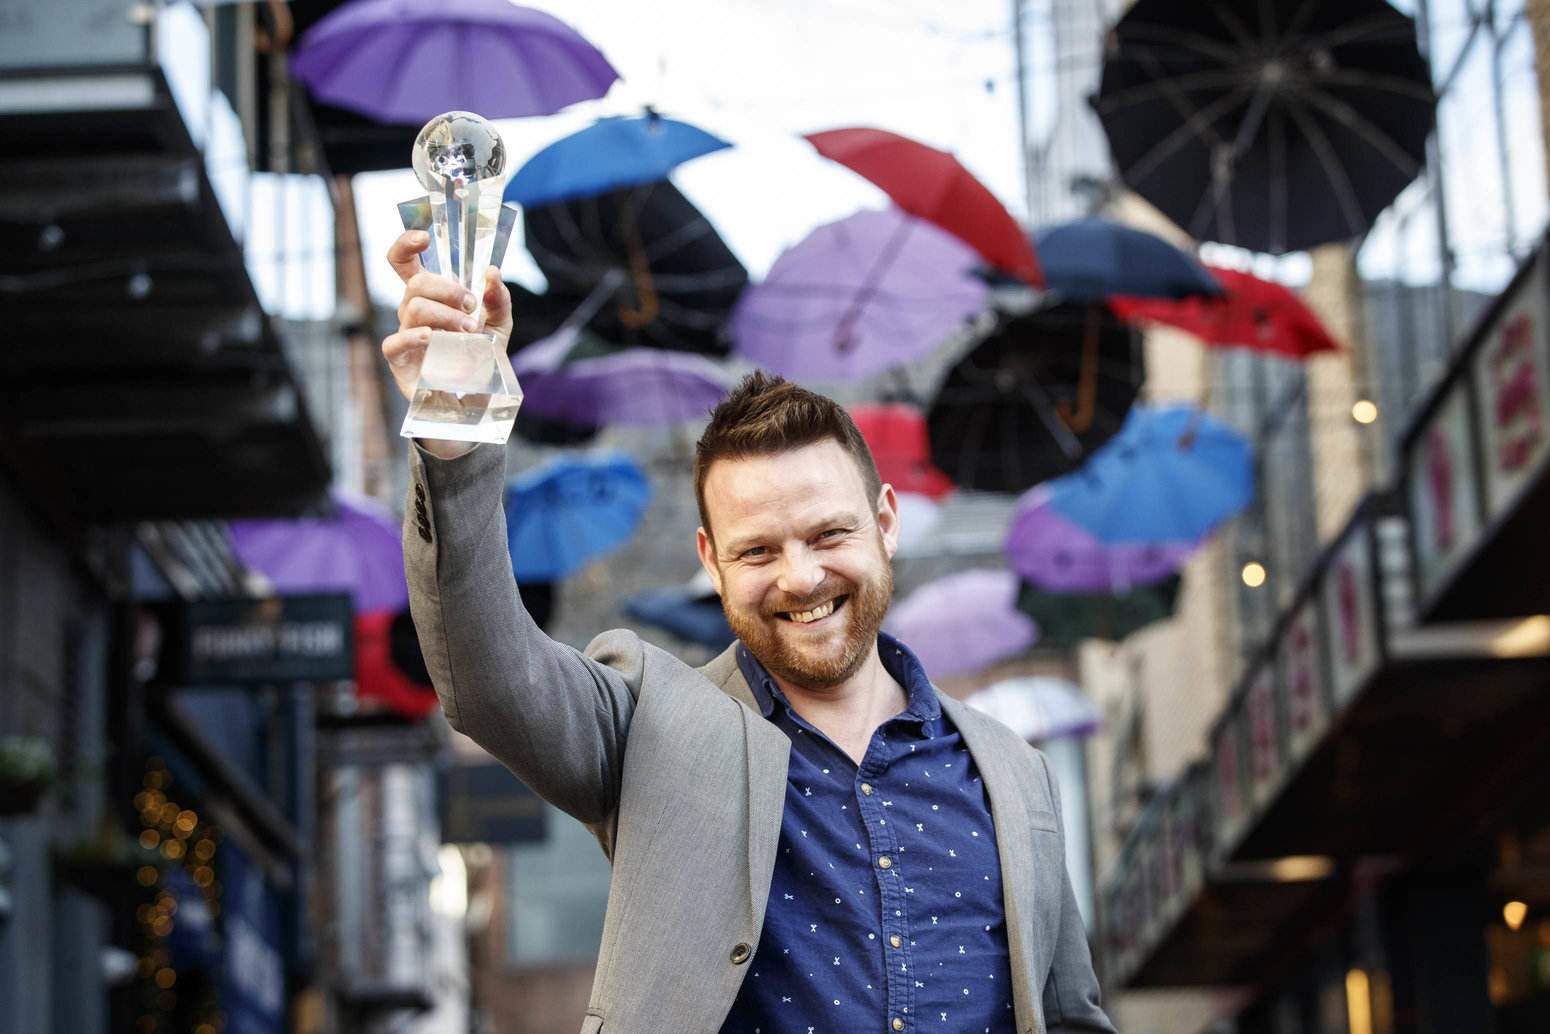 World Class Irish Bartender of the Year 2017 Andy goes on to represent Ireland in the World Class Global Final 2017 in Mexico City this coming September.